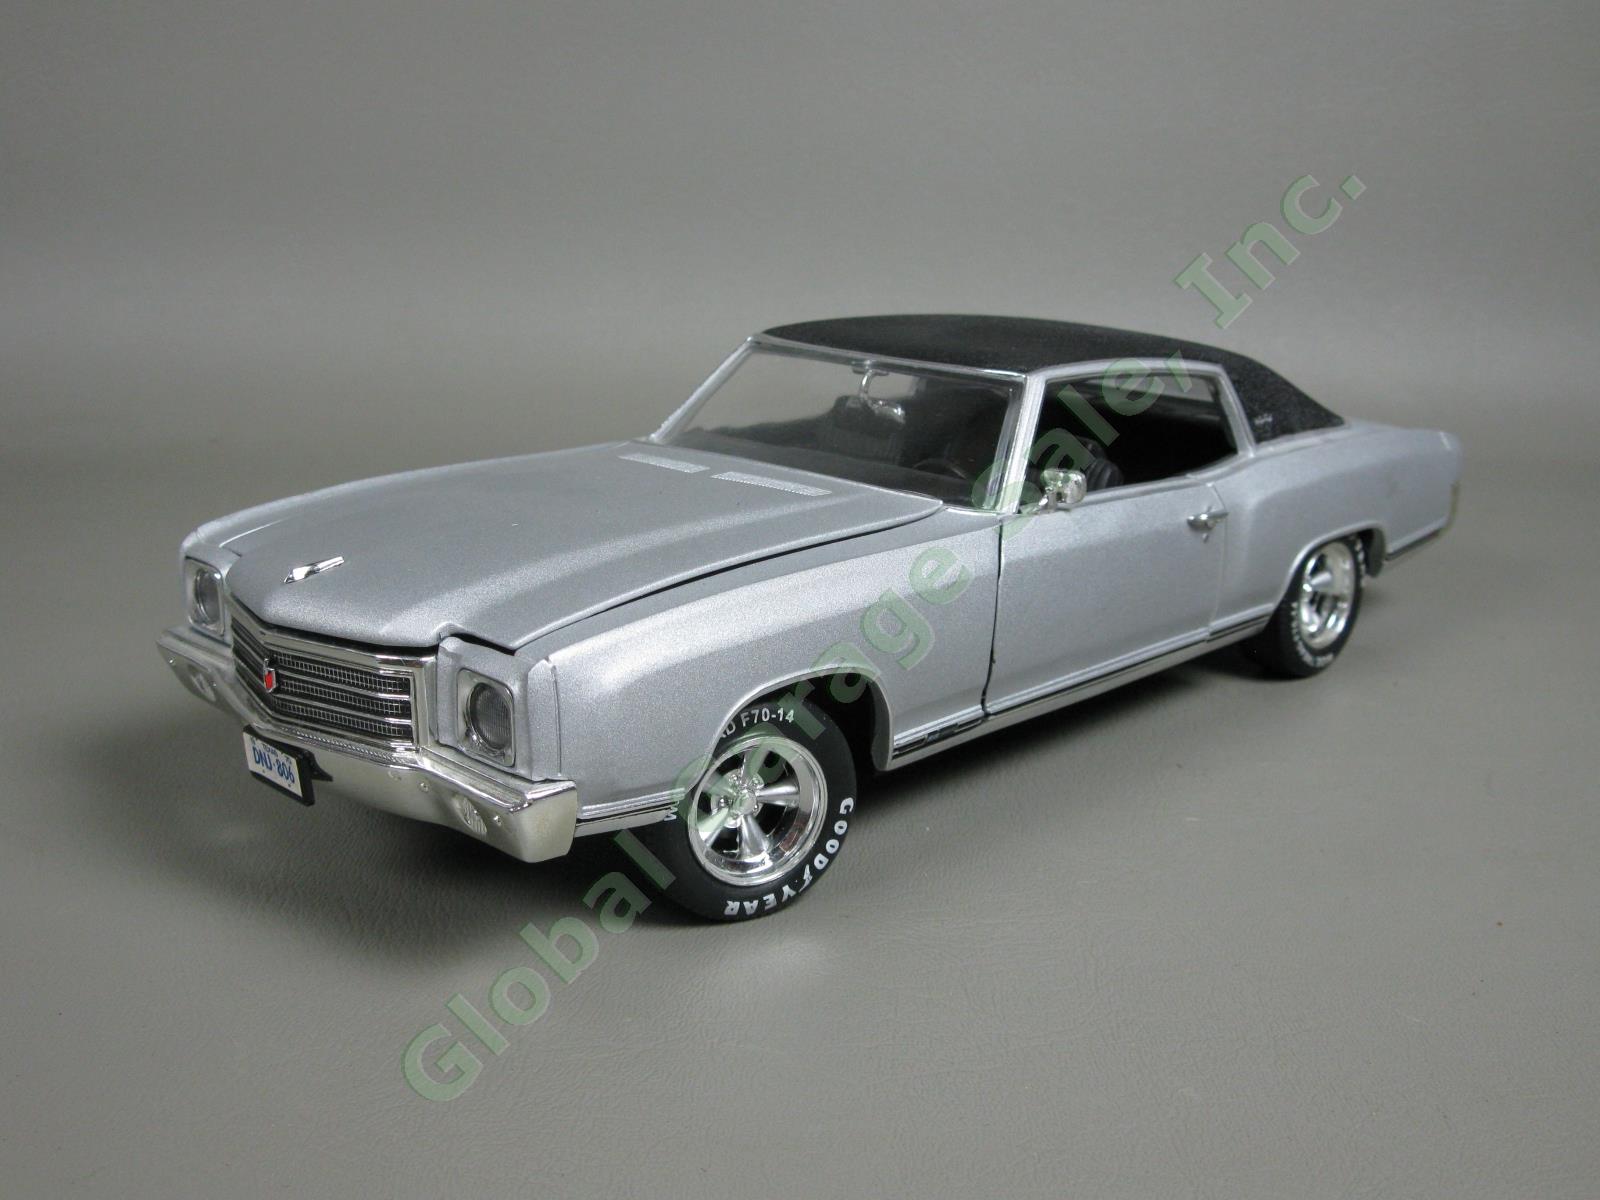 Racing Champions 1970 Chevrolet Monte Carlo SS 454 Diecast American Muscle Car